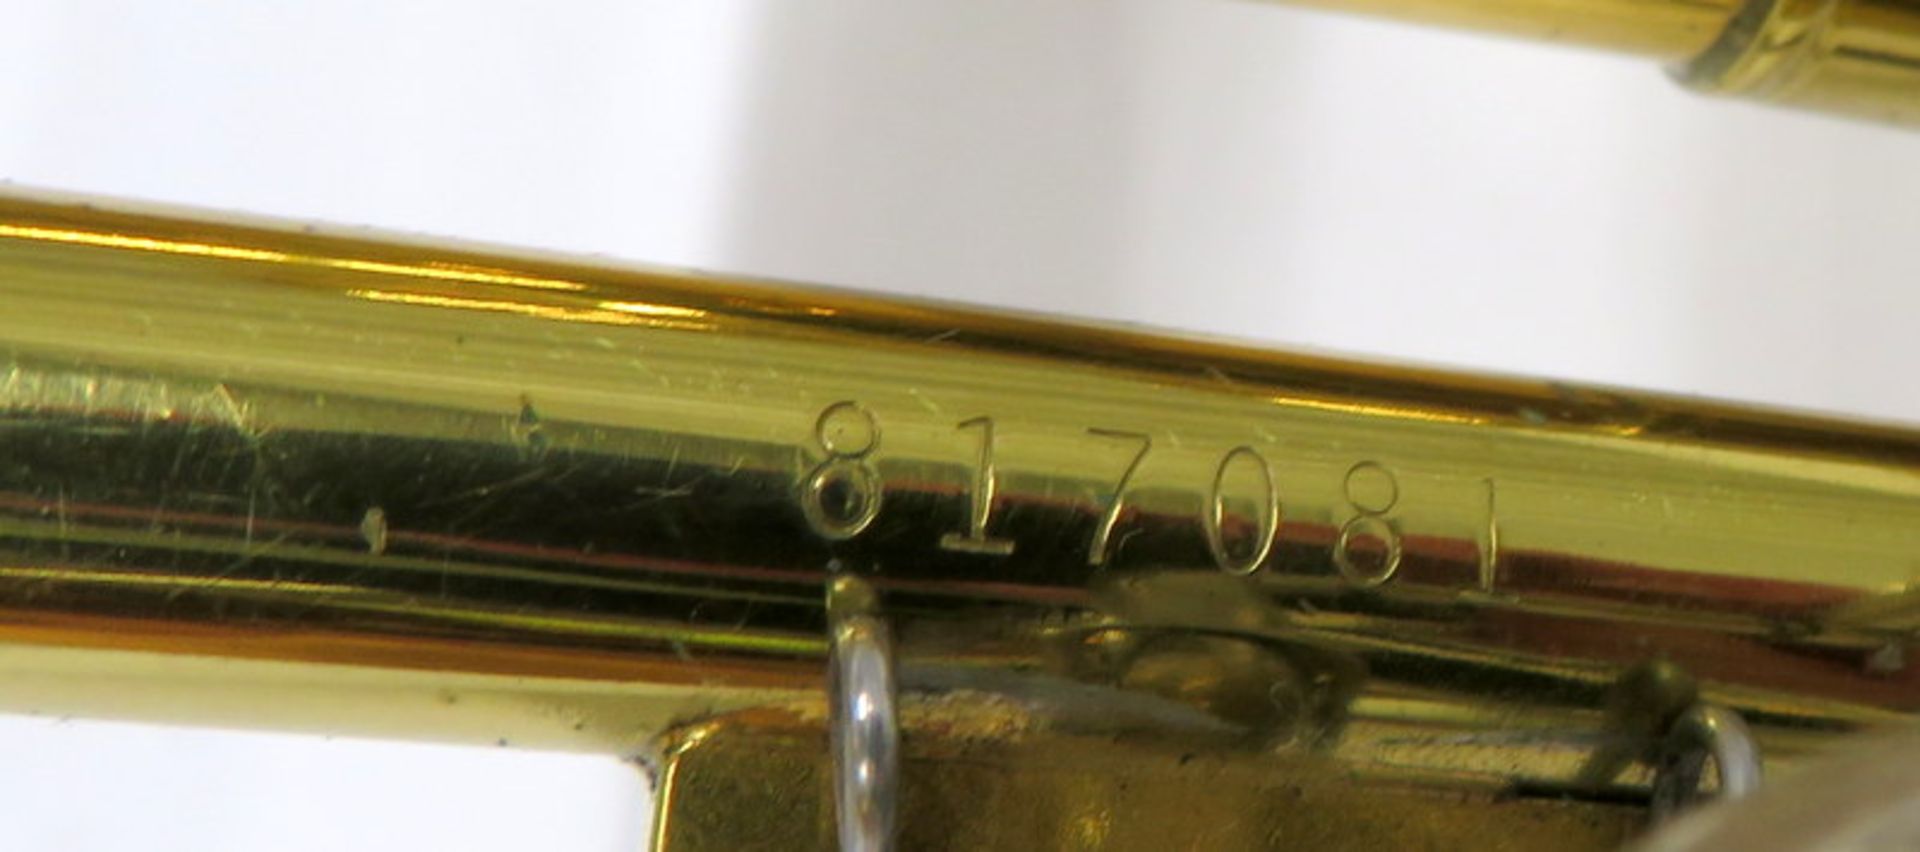 C G Conn 88H Trombone With Case. Serial Number: 817081. Please Note That This Item Has N - Image 14 of 17